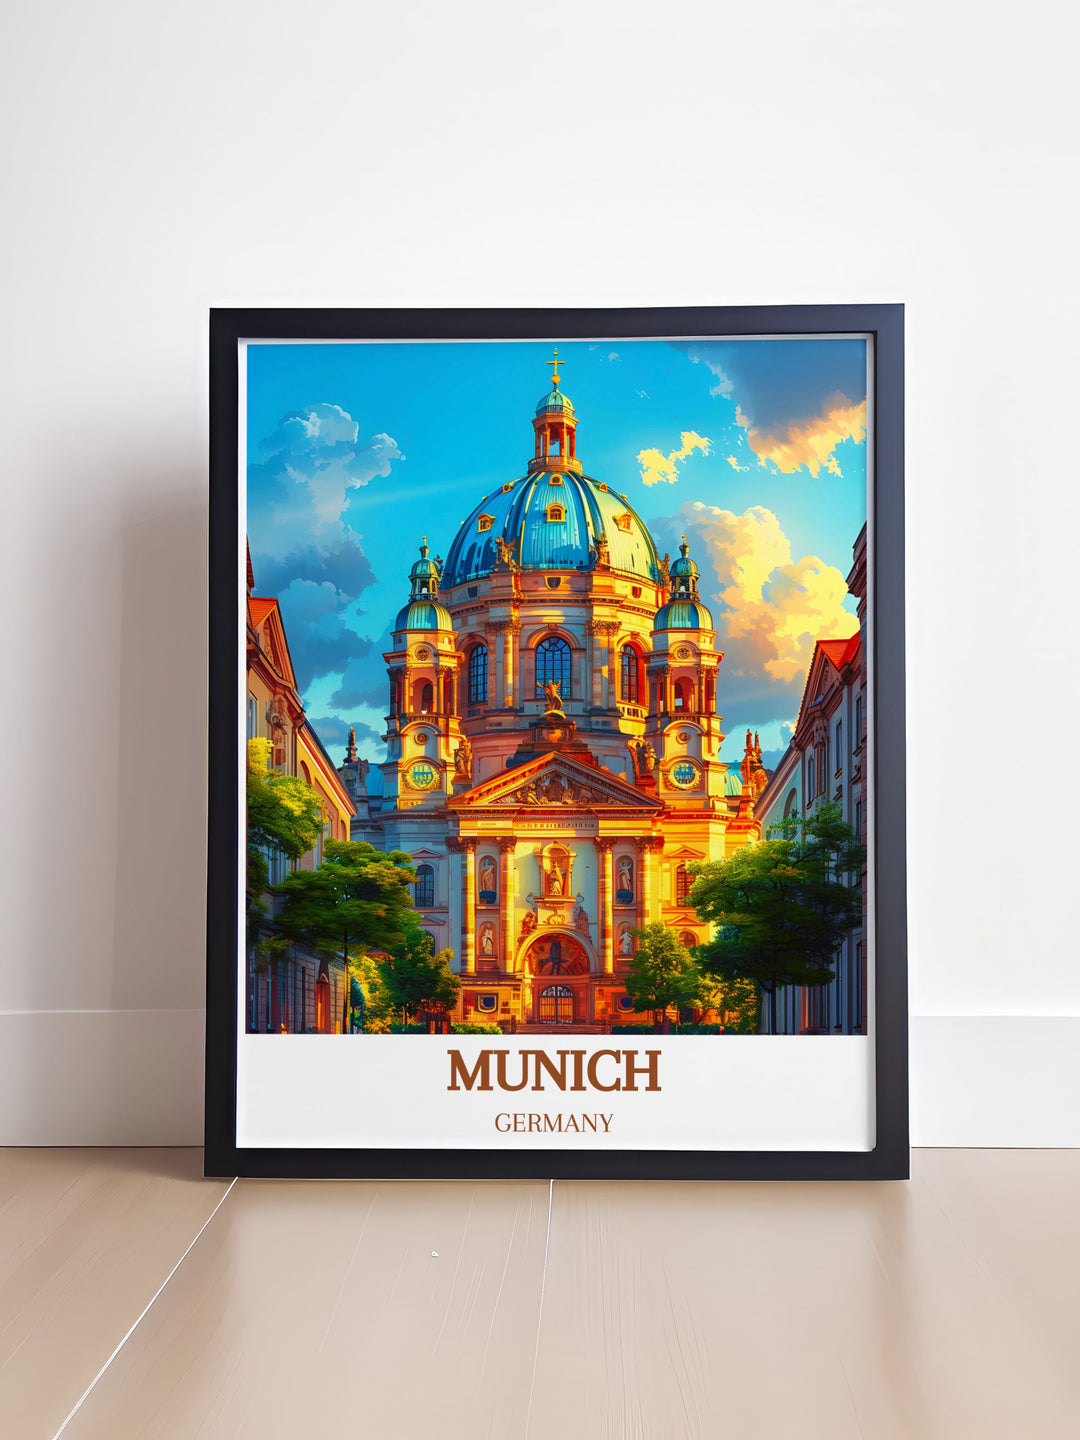 Captivating Munich Photography featuring GERMANY Frauenkirche Dresden vibrant and detailed prints showcase the heart of Munich perfect for home decor travel enthusiasts and Germany wall art collectors makes a thoughtful gift for any occasion anniversary or Christmas